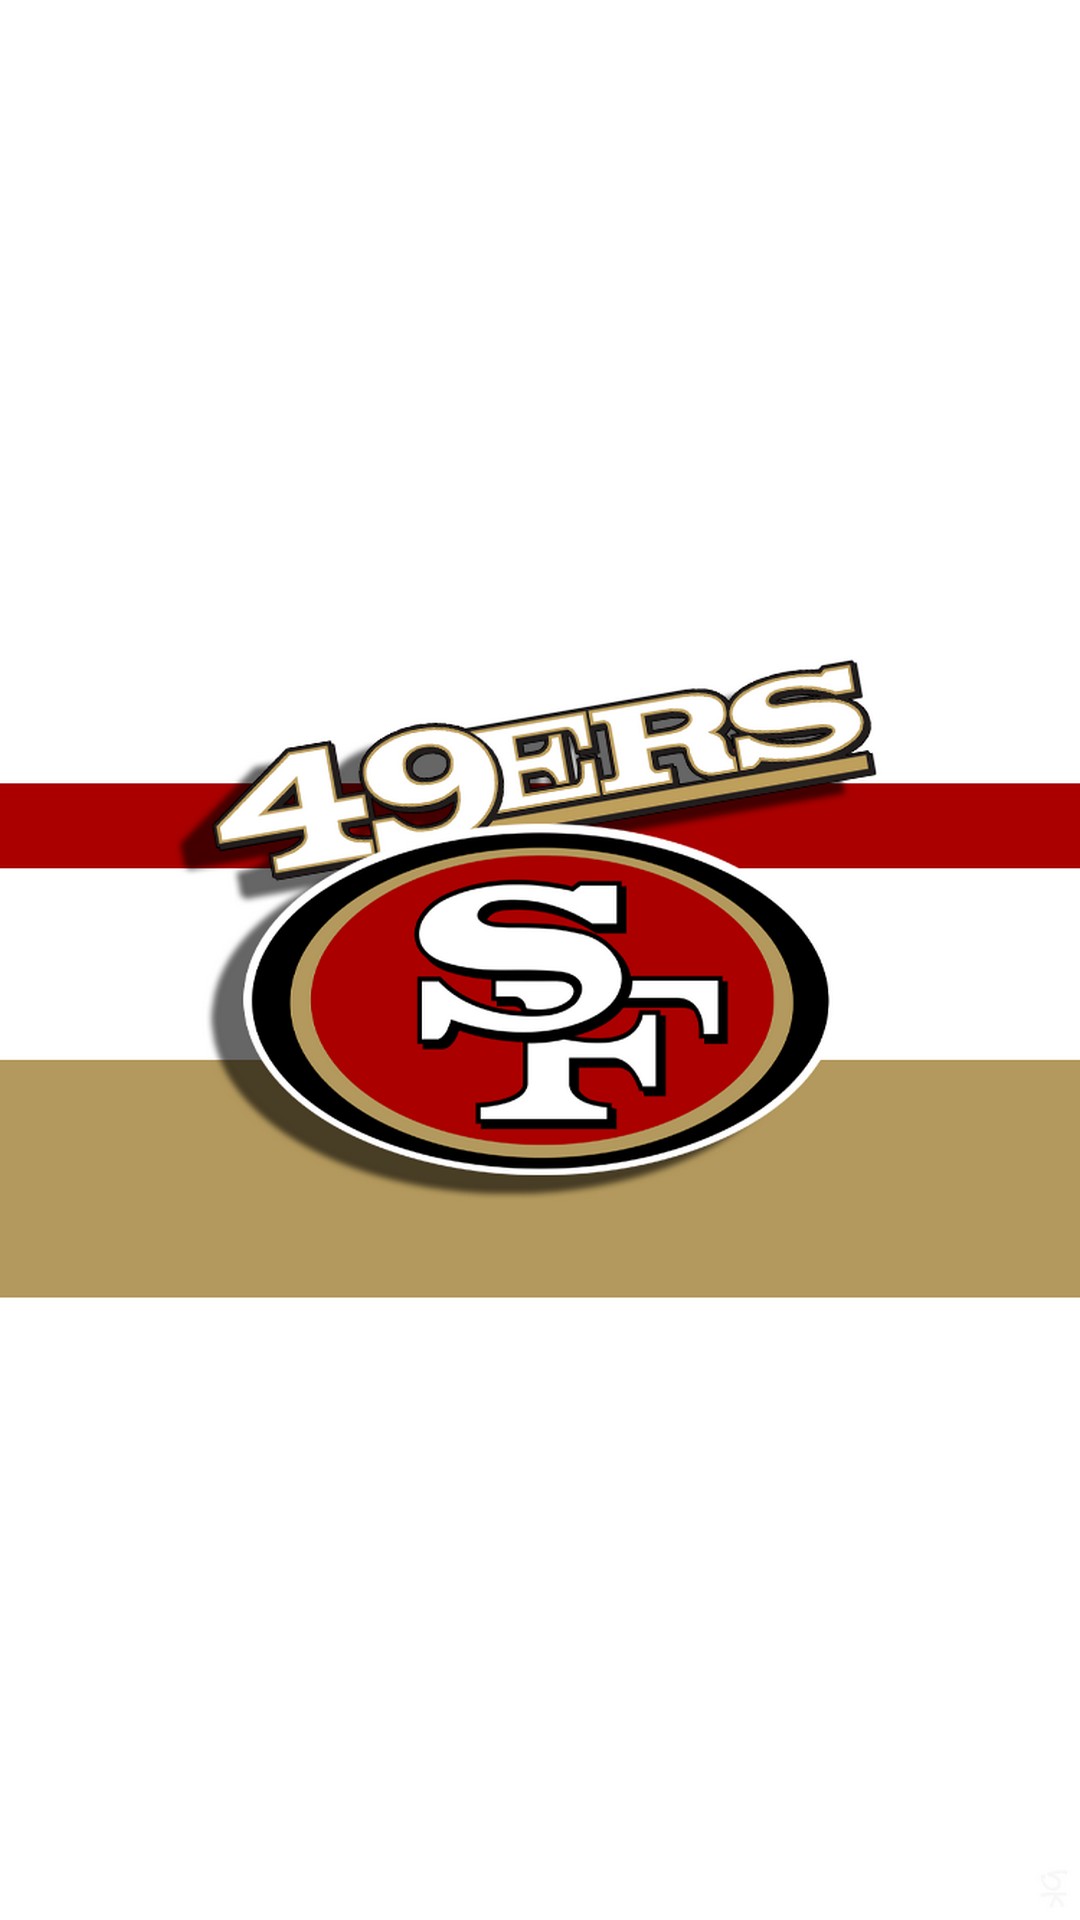 49ers iPhone Screen Lock Wallpaper with high-resolution 1080x1920 pixel. Download and set as wallpaper for Desktop Computer, Apple iPhone X, XS Max, XR, 8, 7, 6, SE, iPad, Android